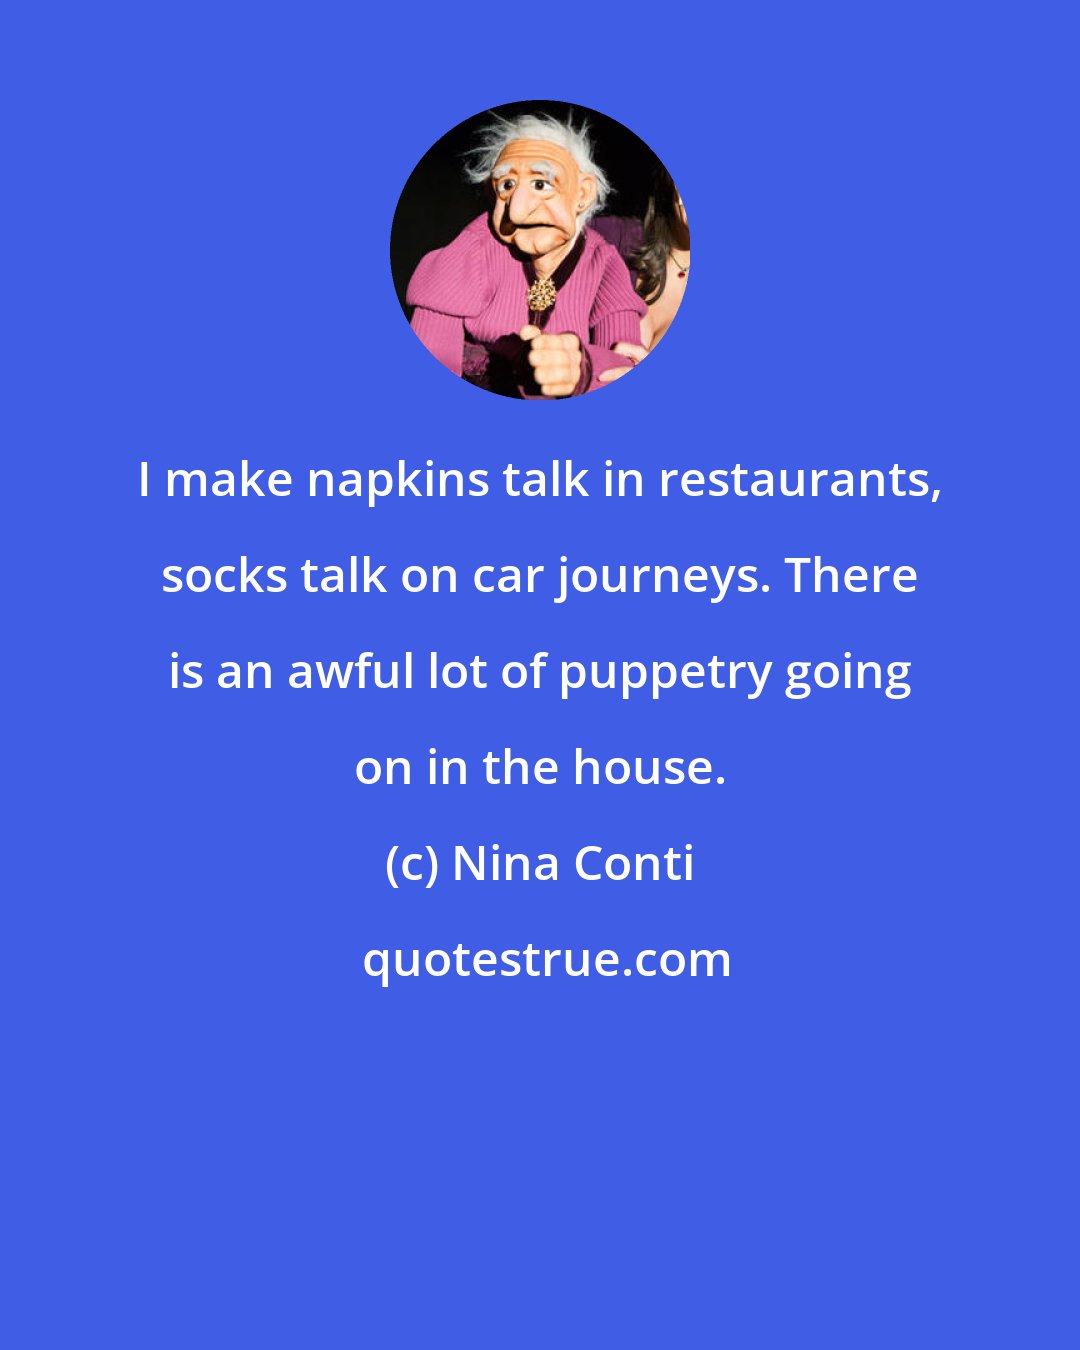 Nina Conti: I make napkins talk in restaurants, socks talk on car journeys. There is an awful lot of puppetry going on in the house.